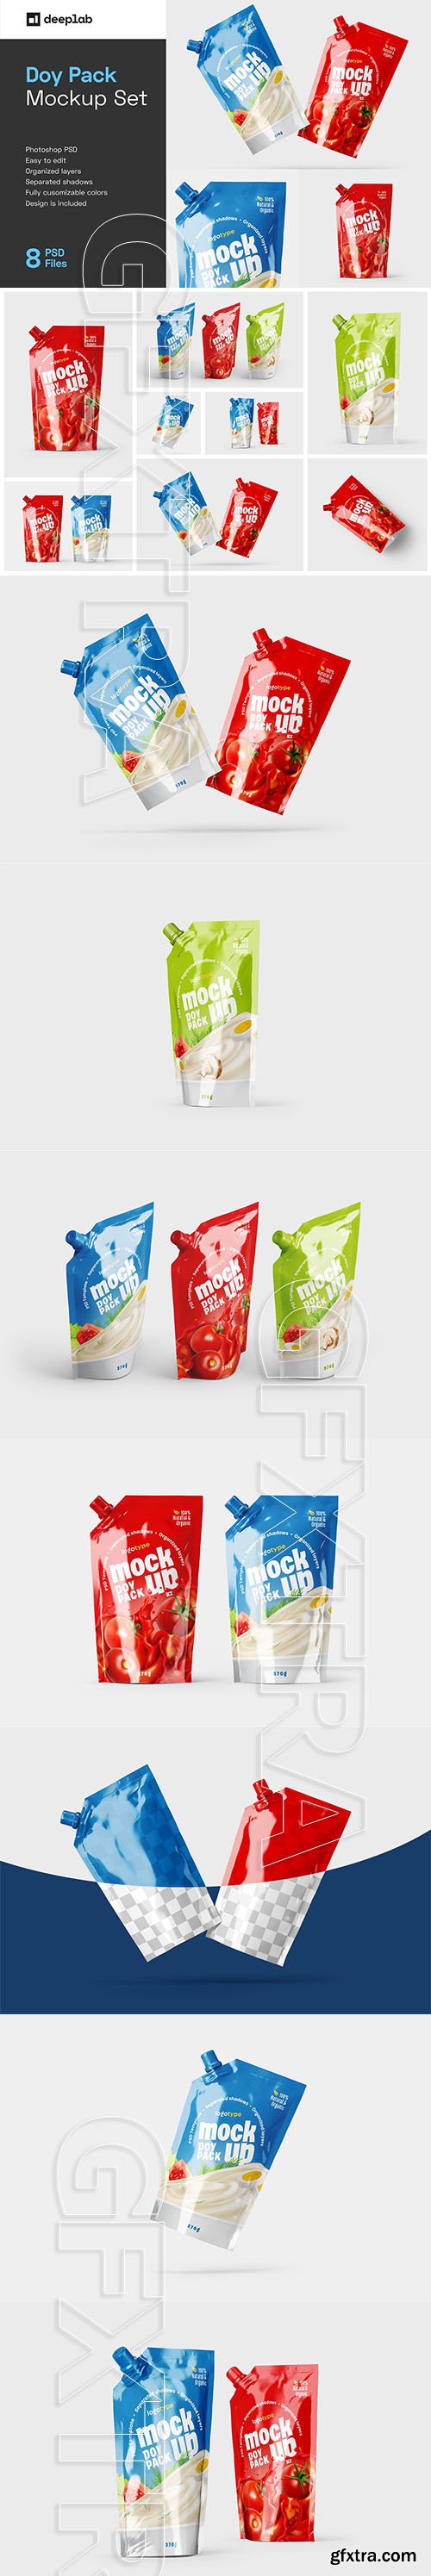 CreativeMarket - Doypack Packaging Mockup Set | Pouch 5797276